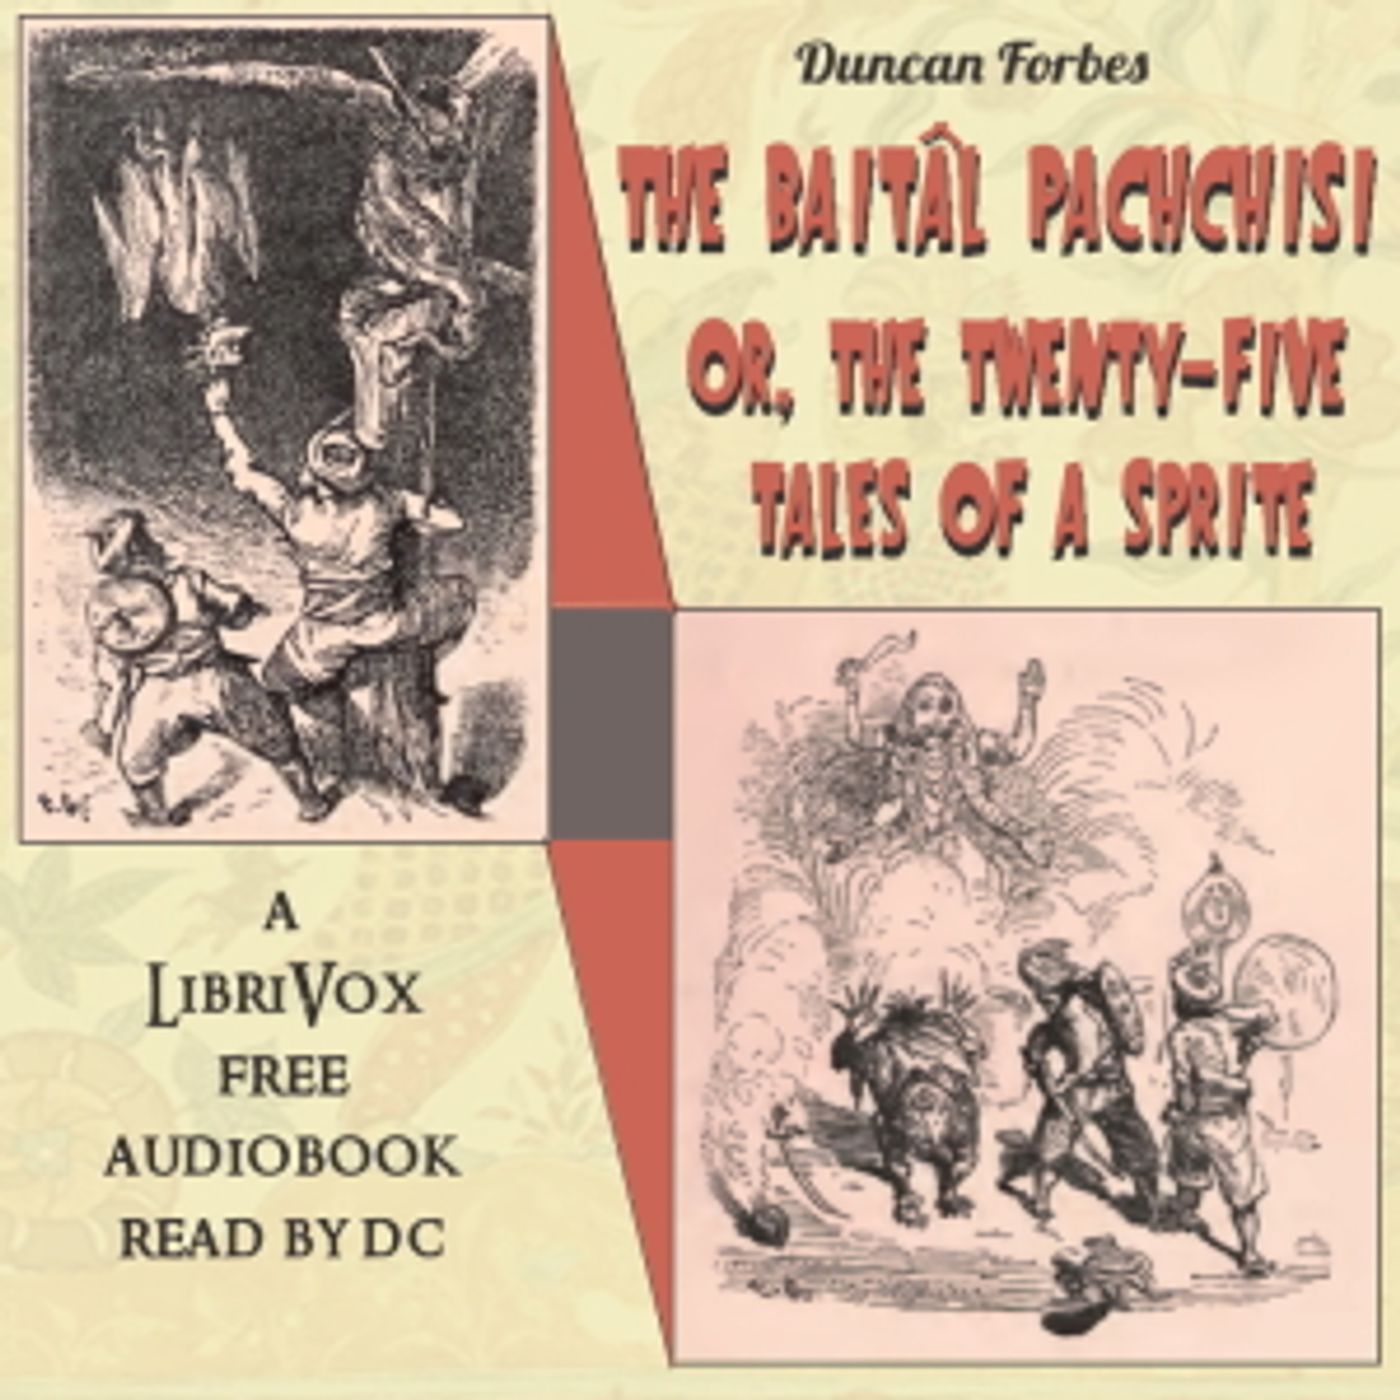 Baitâl Pachchisi; Or, The Twenty-Five Tales of a Sprite, The by Duncan Forbes (1798 – 1868)